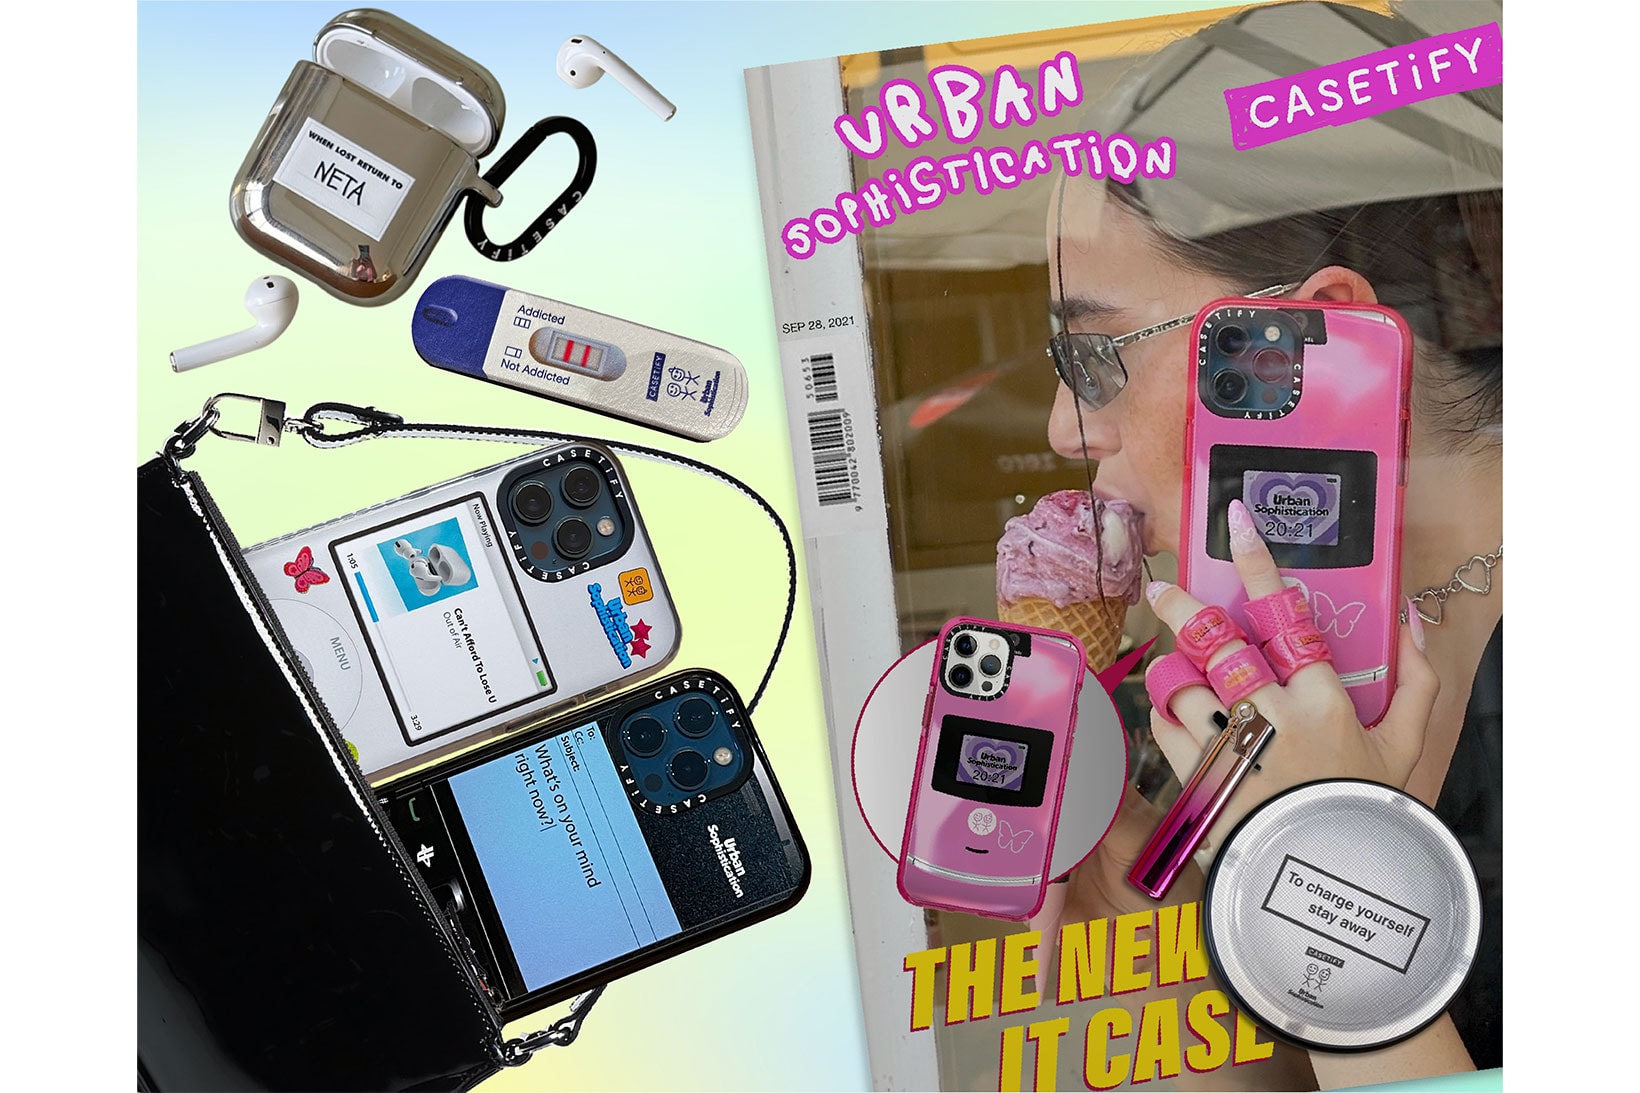 Casetify Urban Sophistication Phone Accessories Collaboration Magazine Flip Phone AirPods